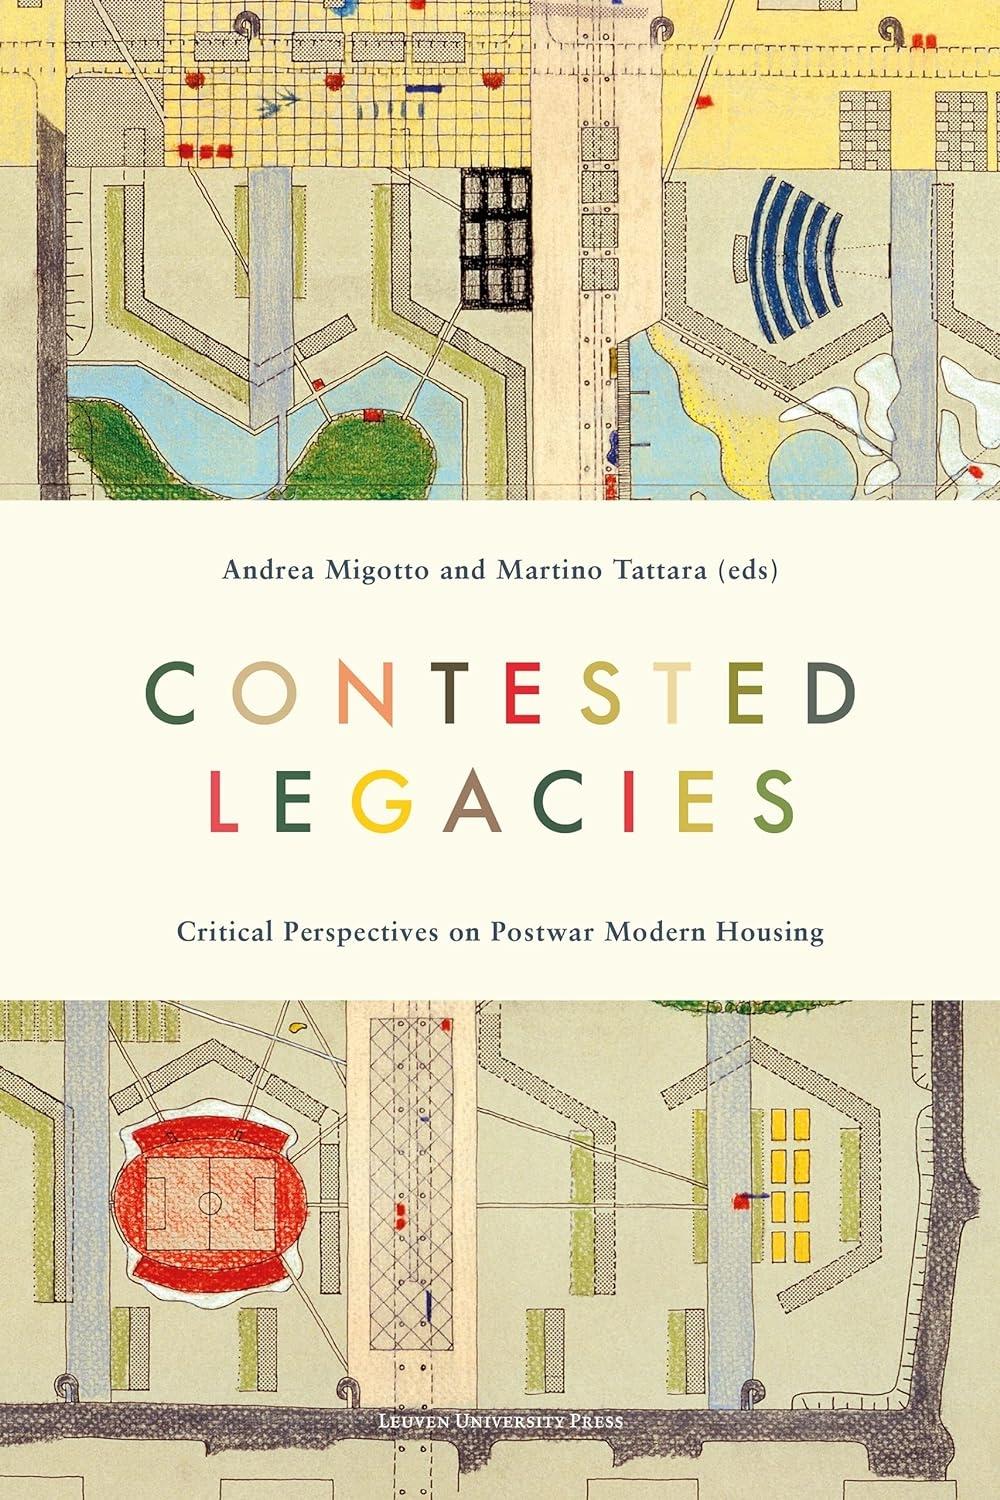 CONTESTED LEGACIES "CRITICAL PERSPECTIVES ON POSTWAR MODERN HOUSING"